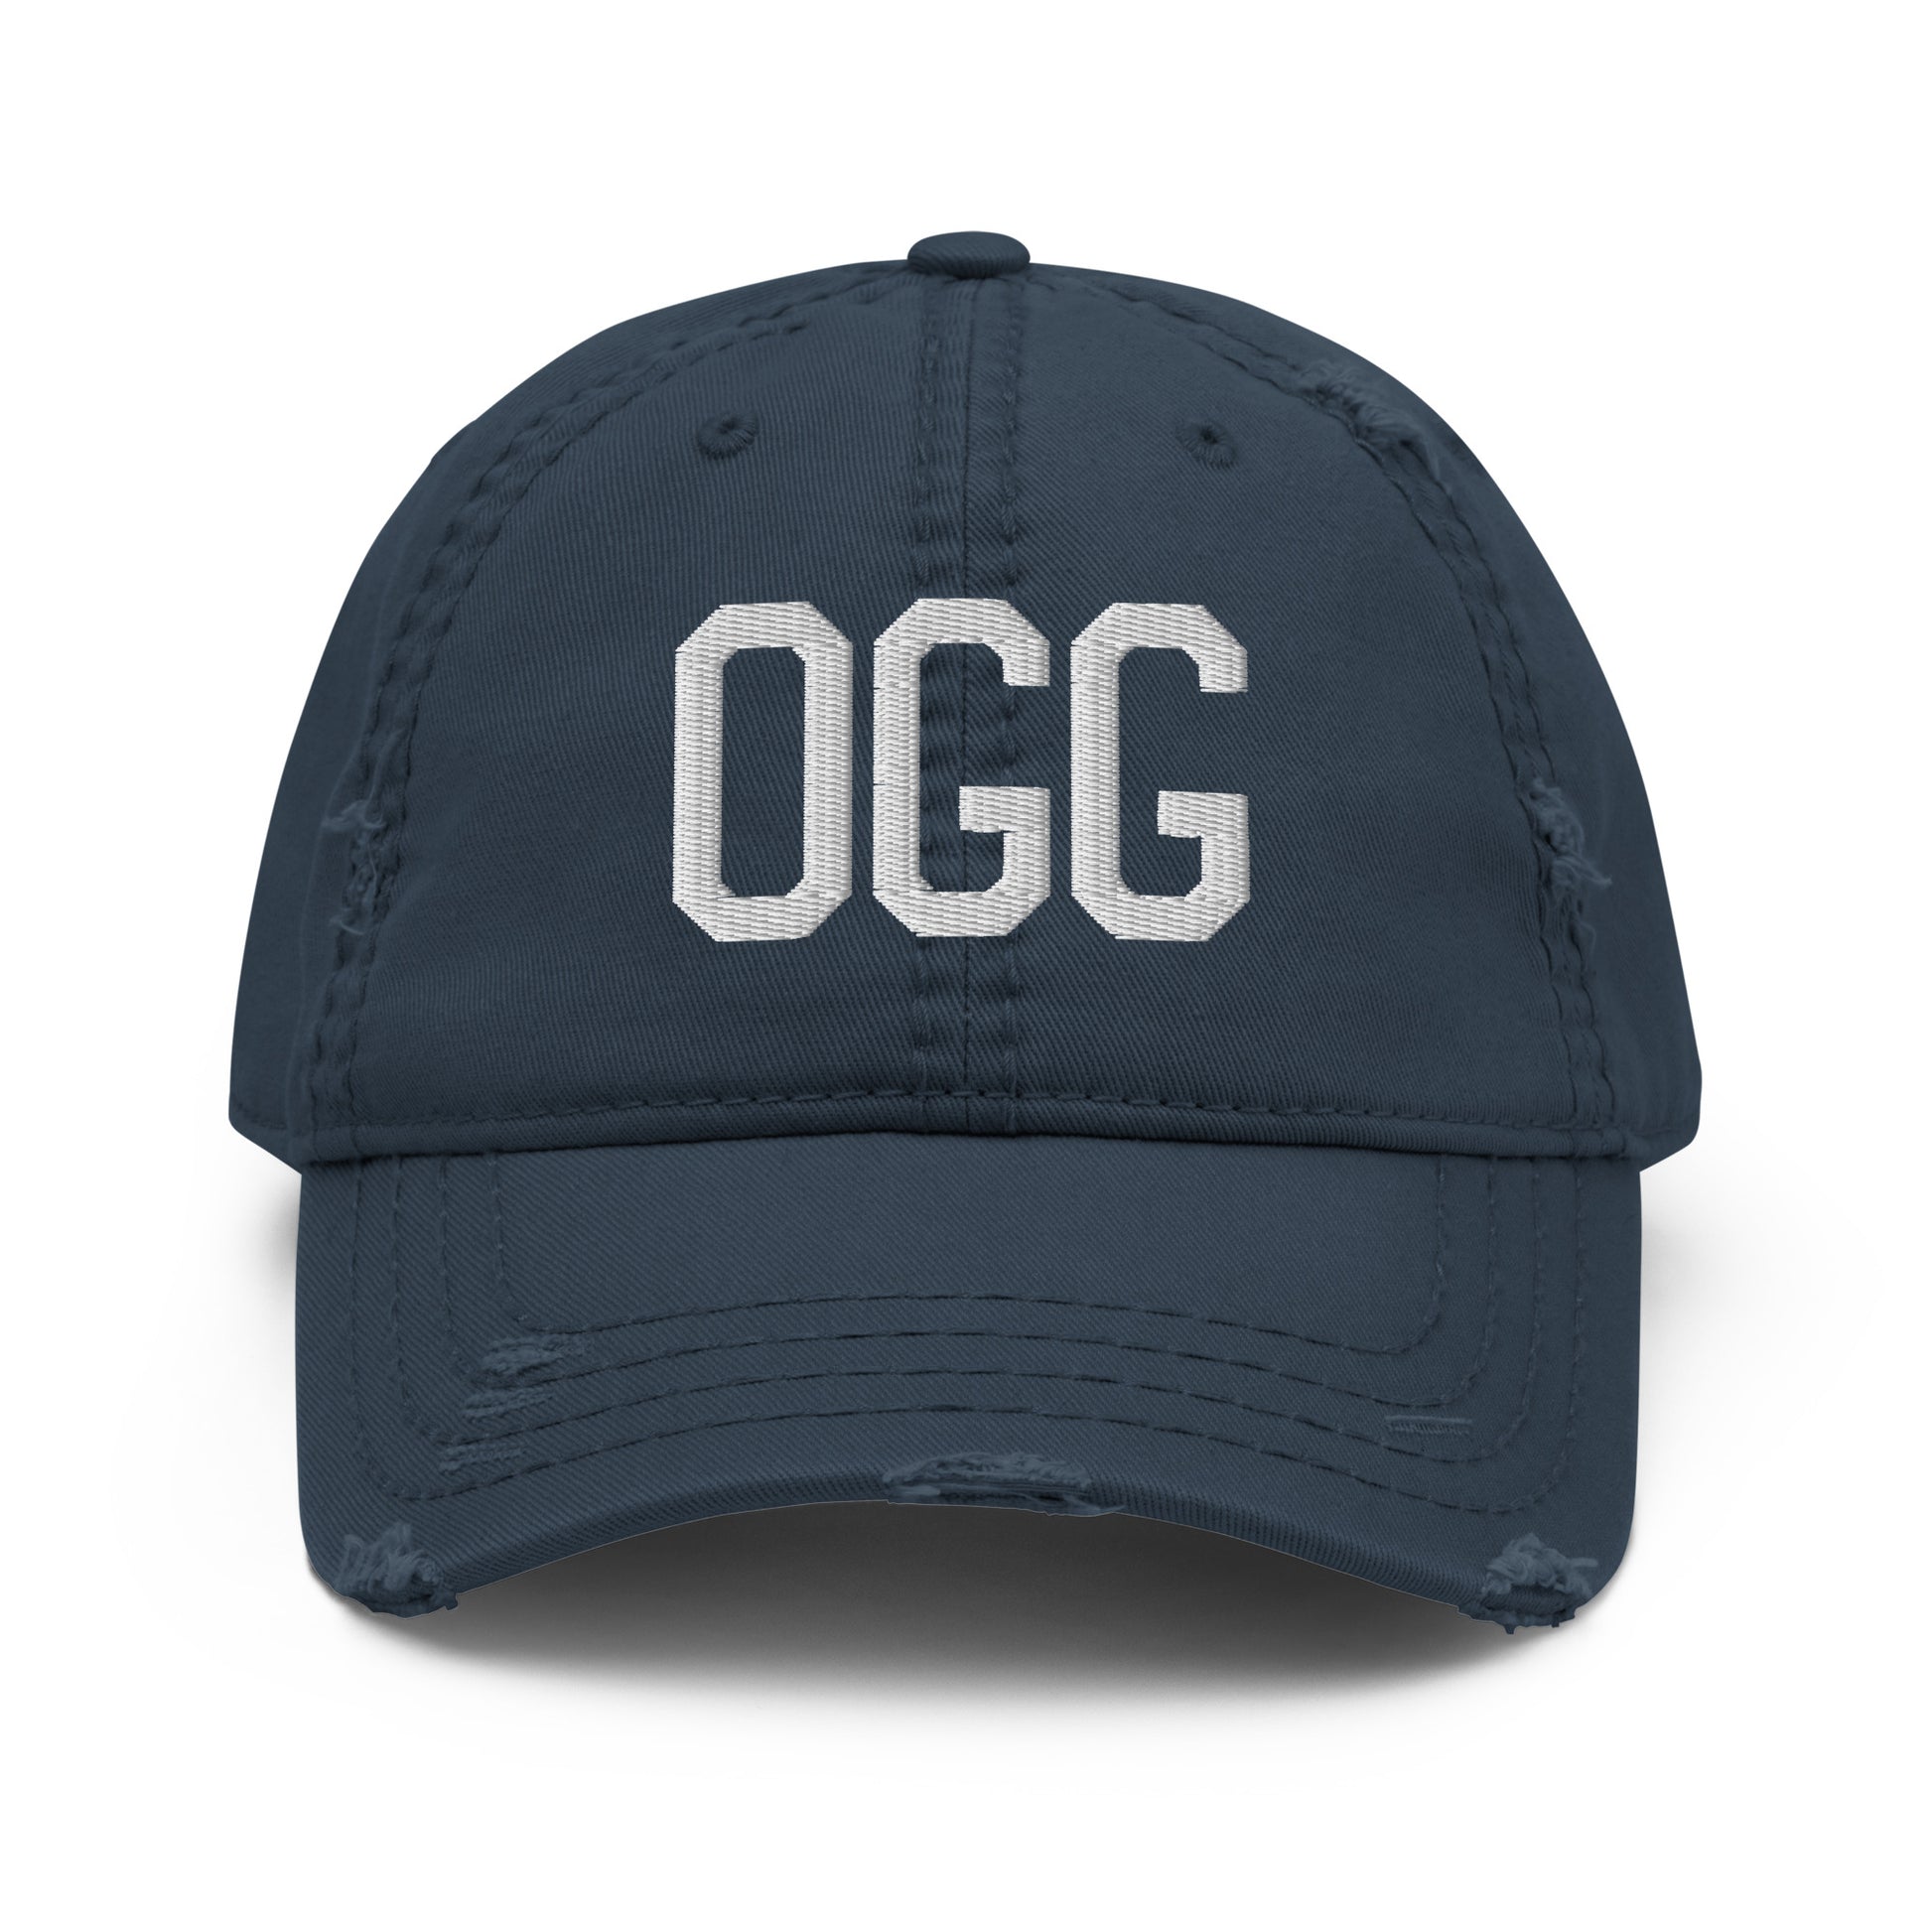 Airport Code Distressed Hat - White • OGG Maui • YHM Designs - Image 13